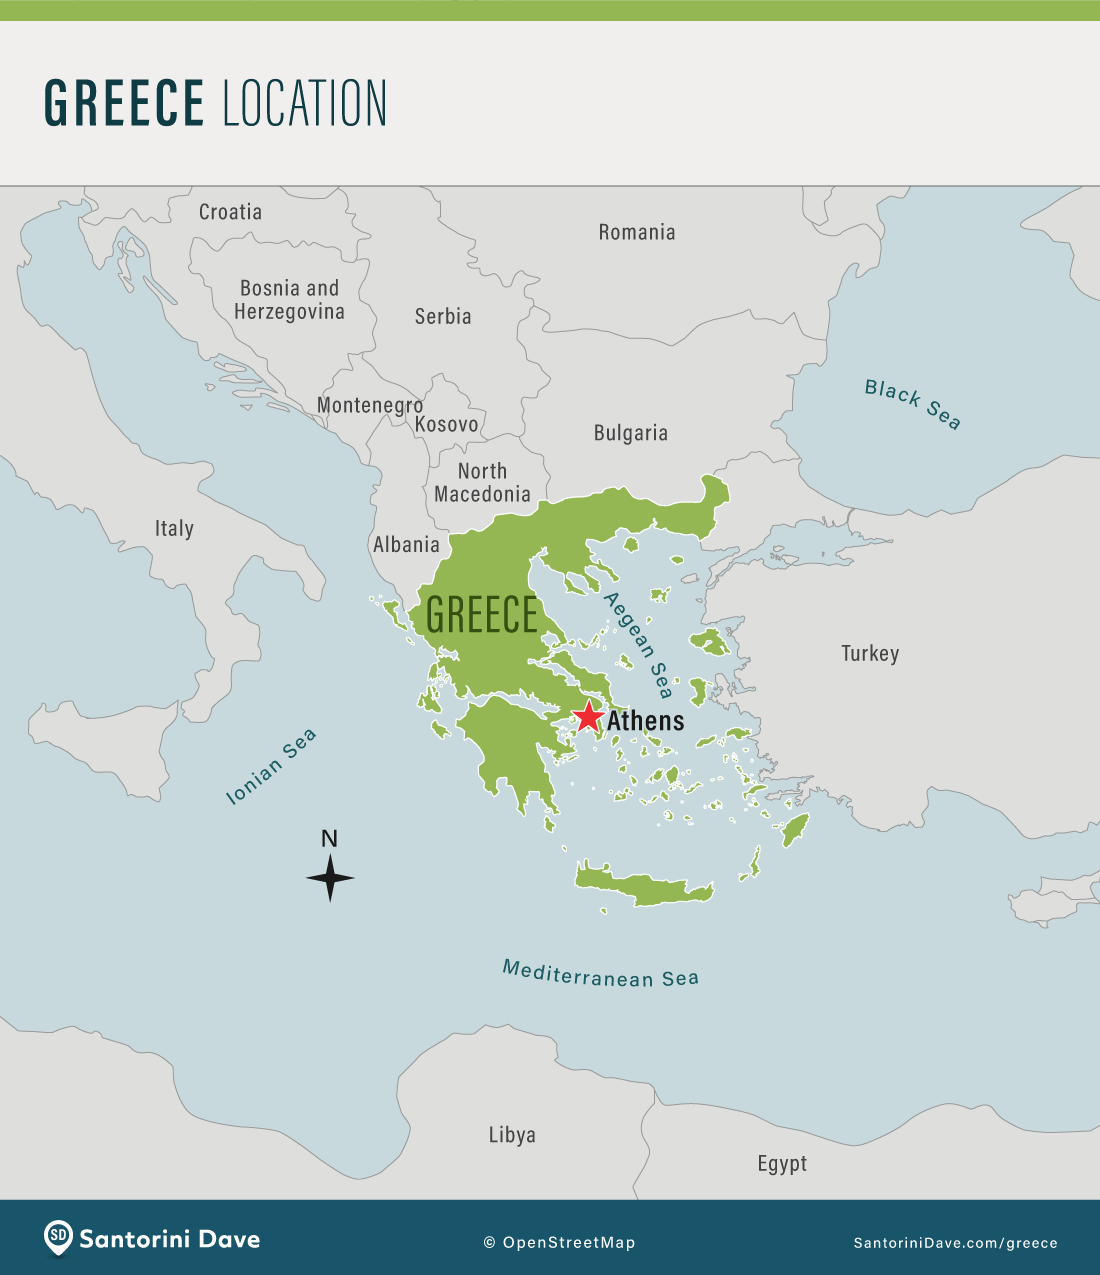 Map showing the location of Greece within Europe